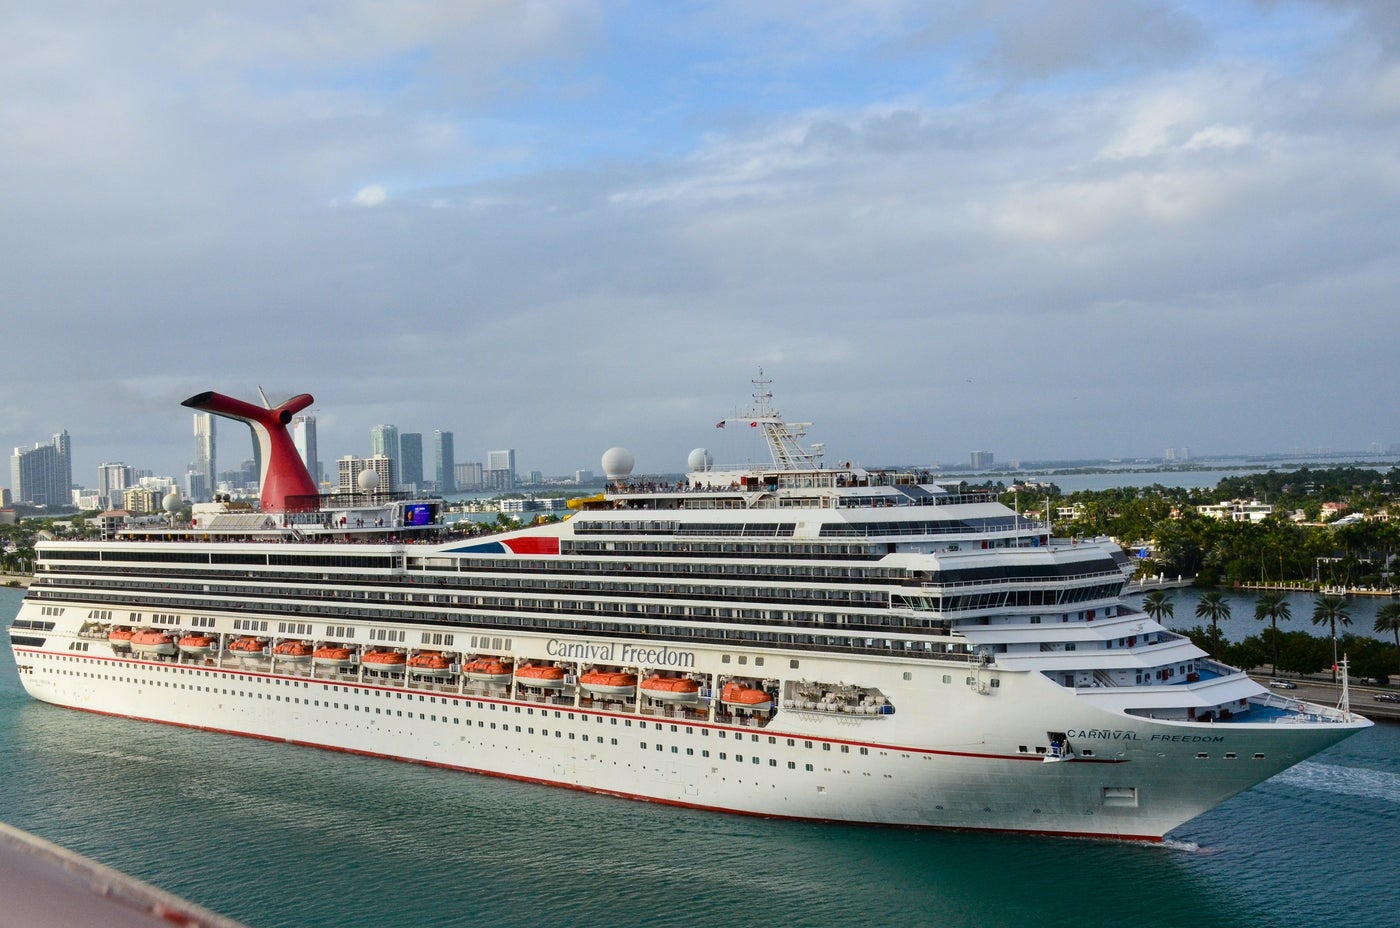 Fire-Damaged Carnival Cruise Ship Returns To Service With Missing ‘Whale Tail,’ And Fans Ask: Will It Grow Back?